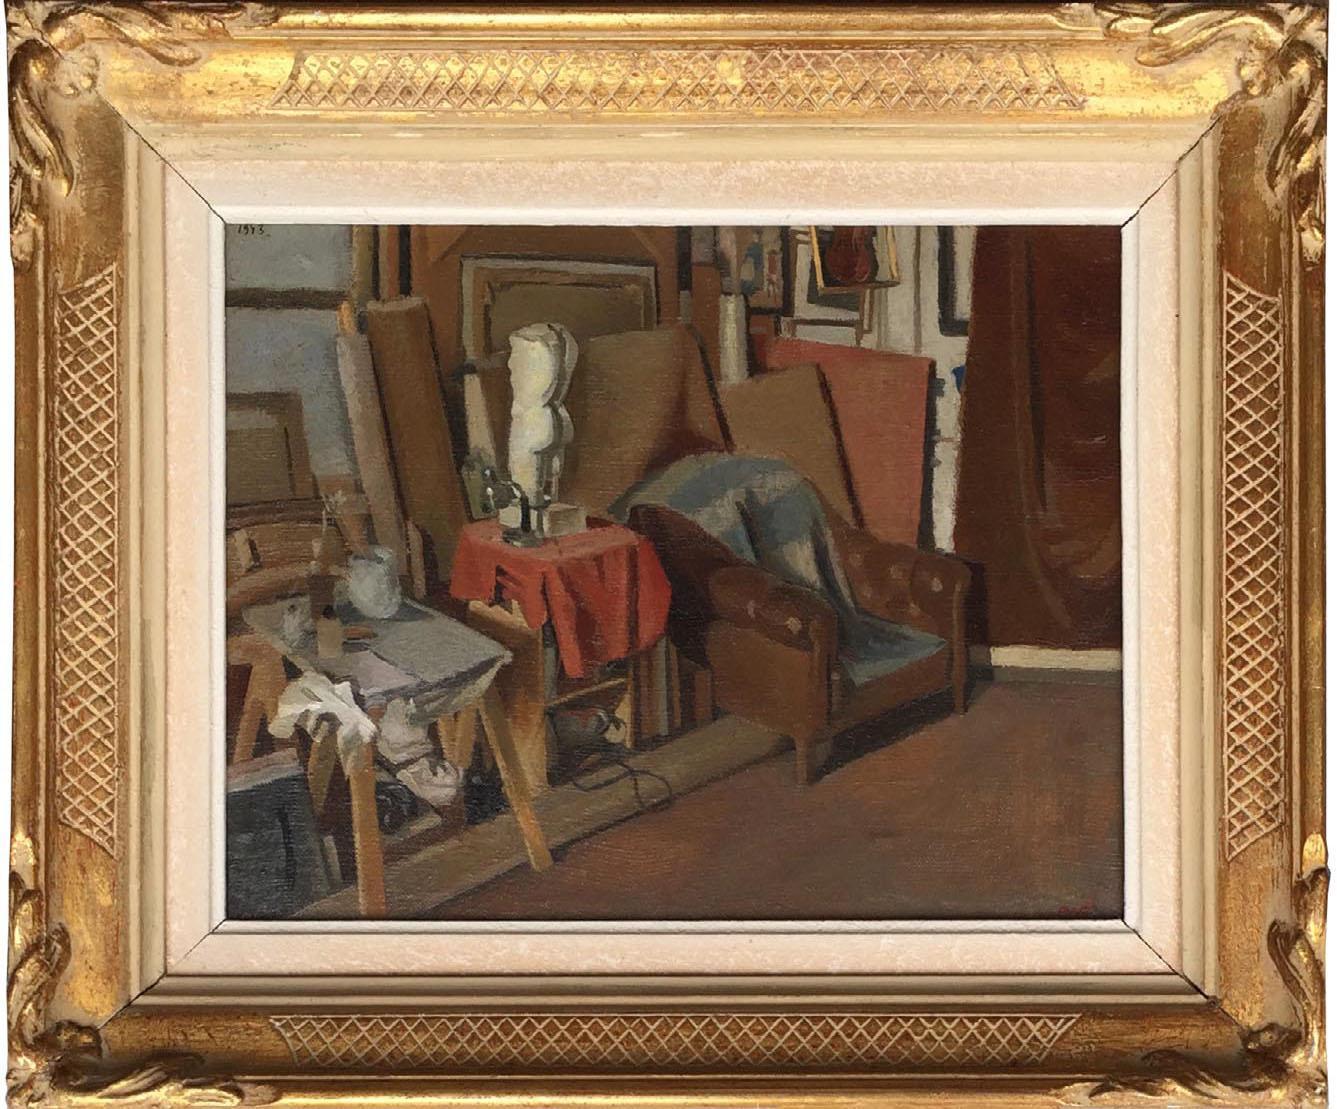 Studio Interior, 1931 - Painting by Erik Wessel-Fougstedt (1915-1990)